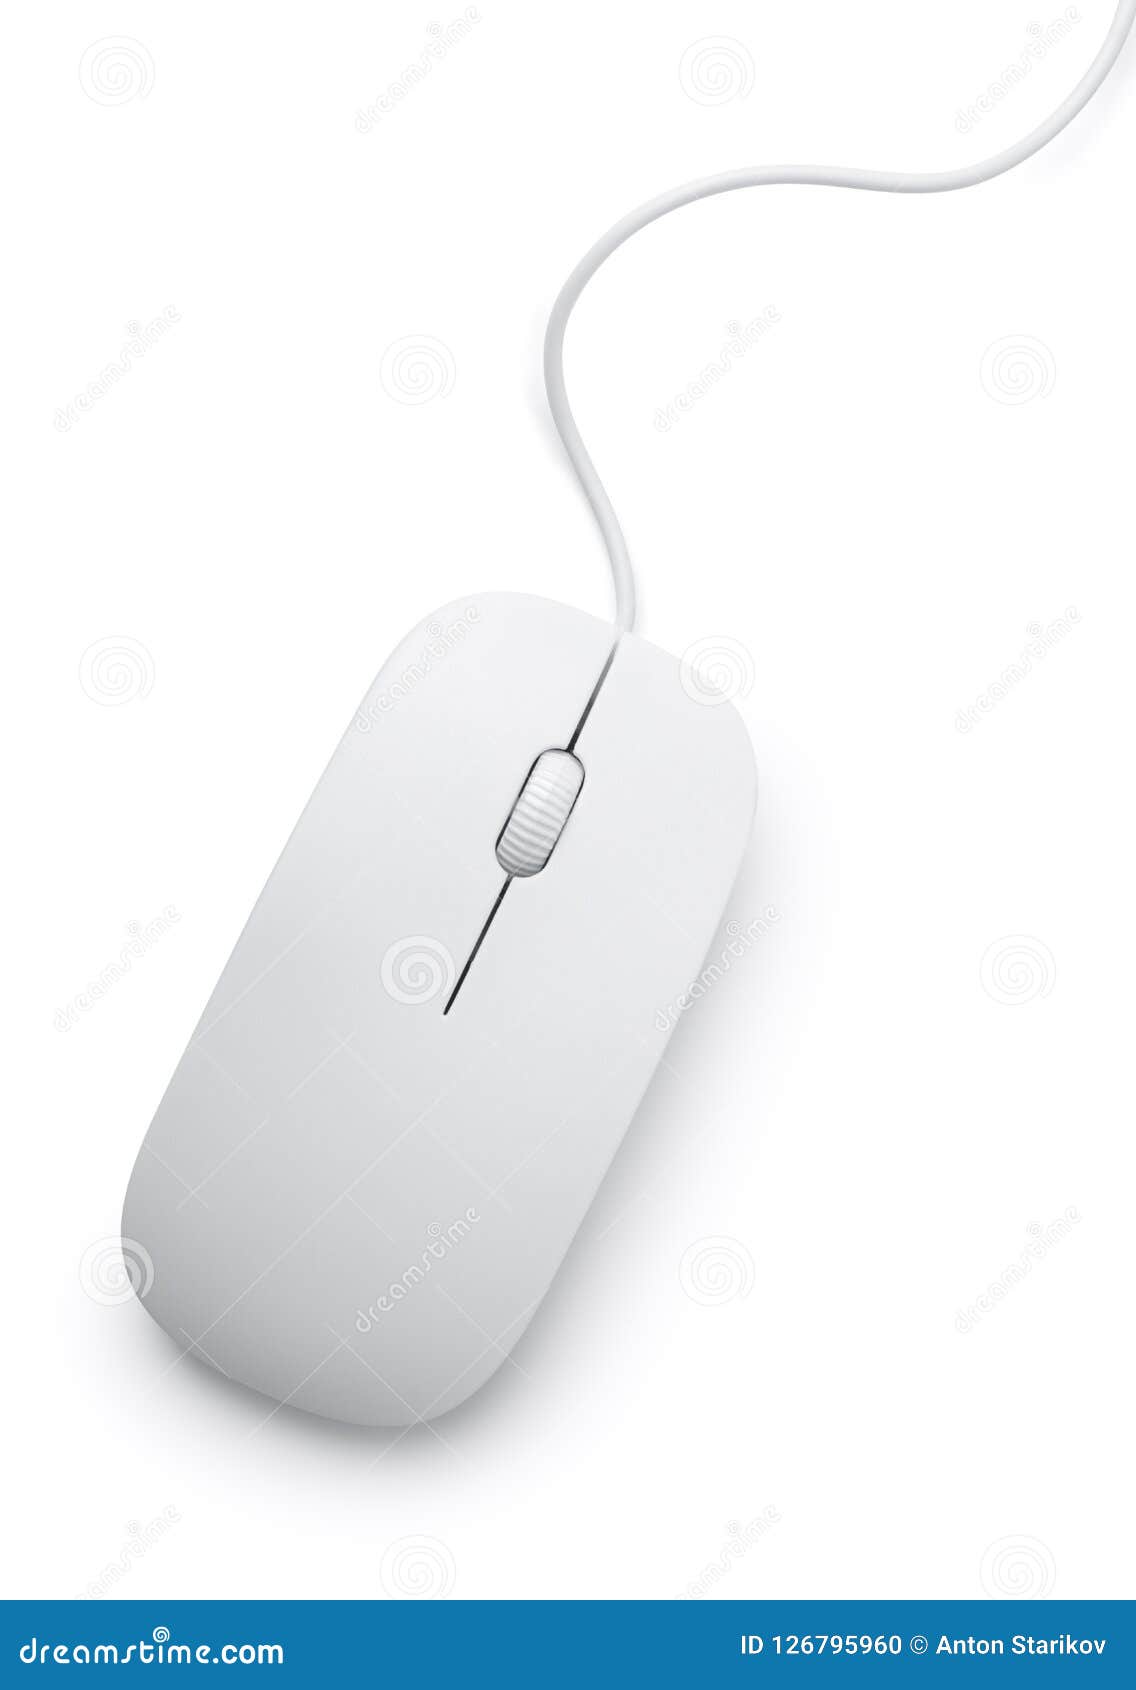 hovedlandet ydre spontan Top View of White Computer Mouse Stock Photo - Image of object, mouse:  126795960